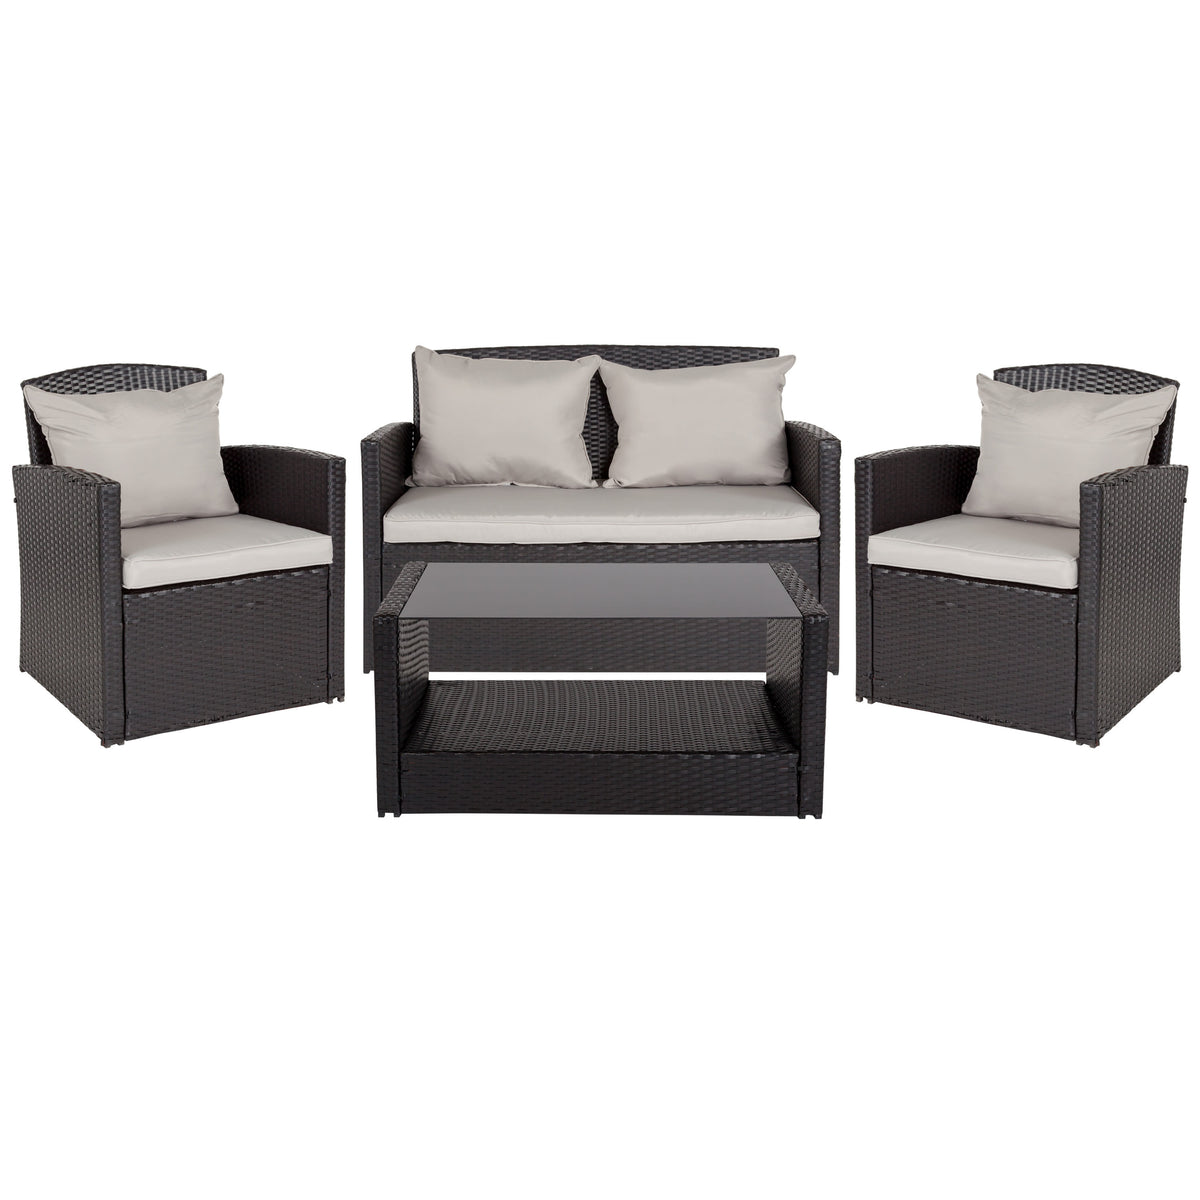 Gray Cushions/Black Frame |#| 4 Piece Black Patio Set with Gray Back Pillows & Seat Cushions - Outdoor Seating